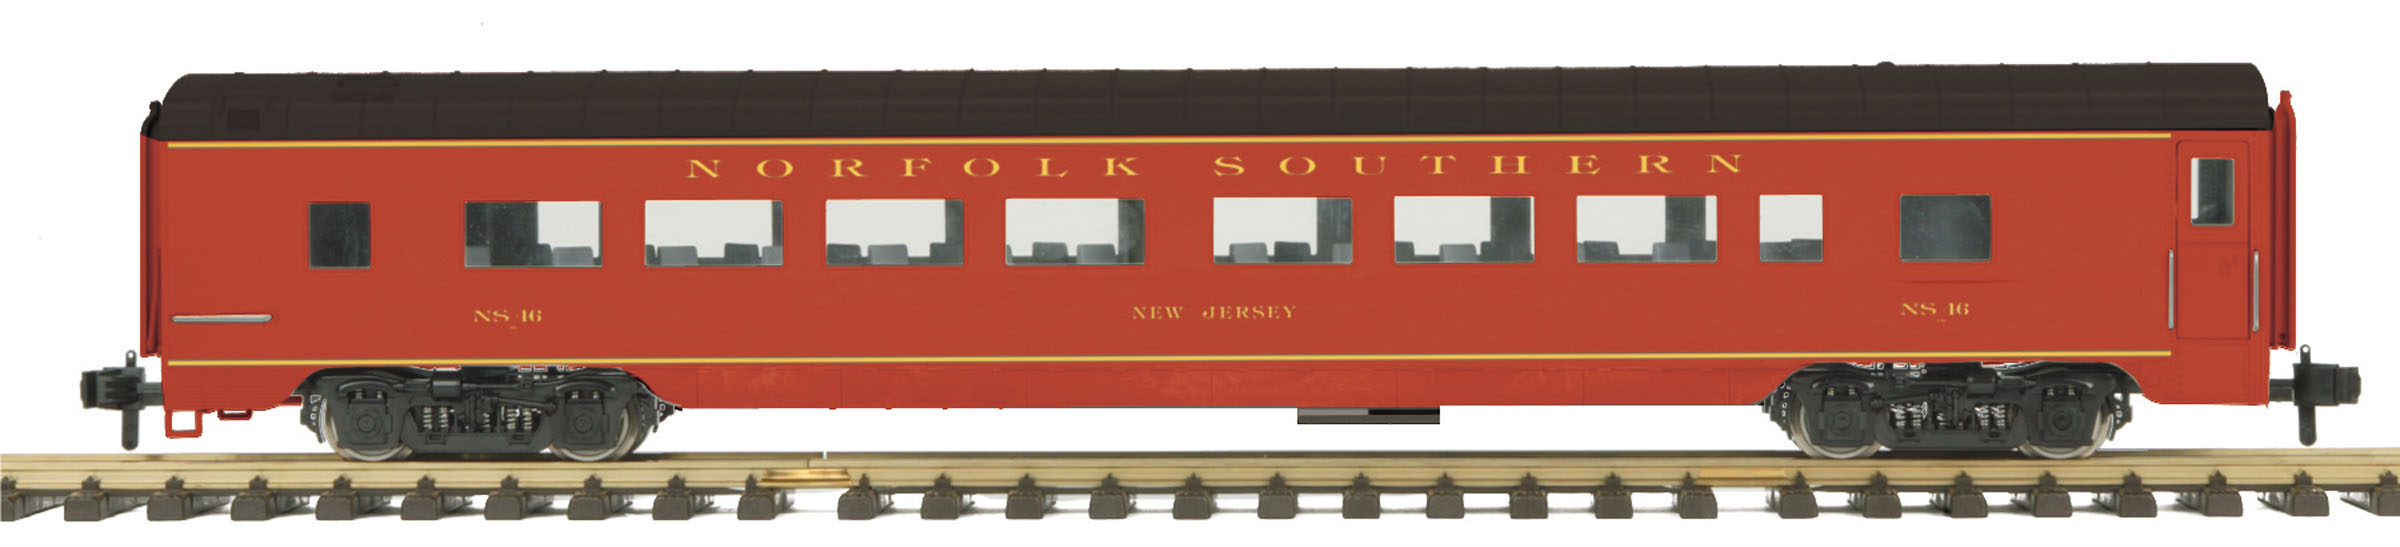 Item No. 70-67029 Norfolk Southern Streamlined Passenger Coach (Smooth 